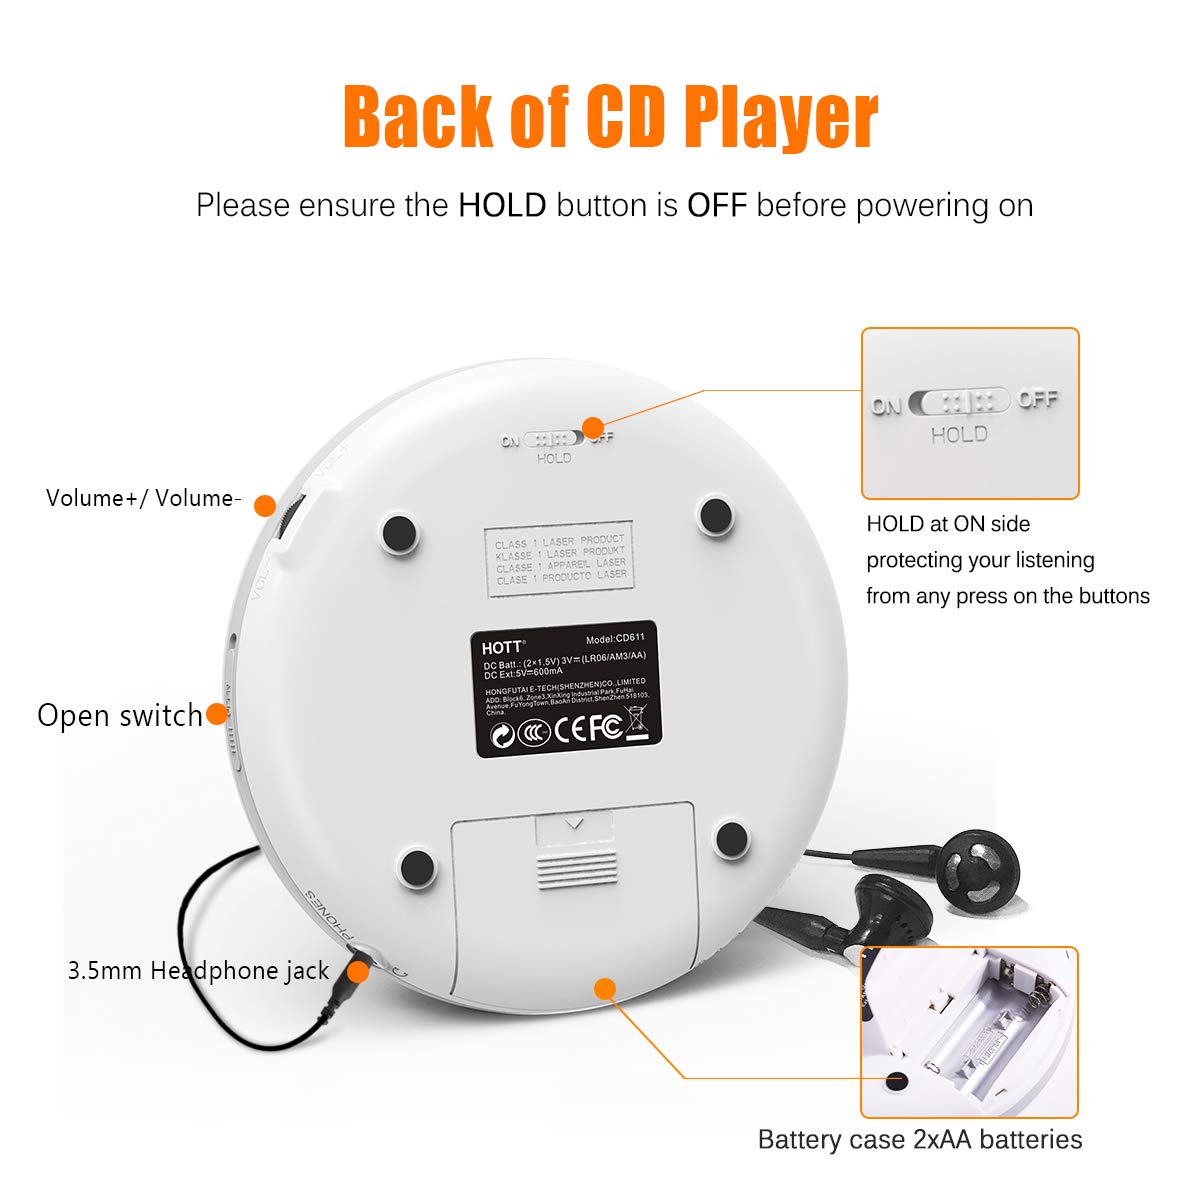 HOTT Portable CD Player CD611 Small Walkman CD Player with Stereo Headphones USB Cable LED Display Anti-Skip Anti-Shock Personal Compact Disc Music Player White - image 3 of 7